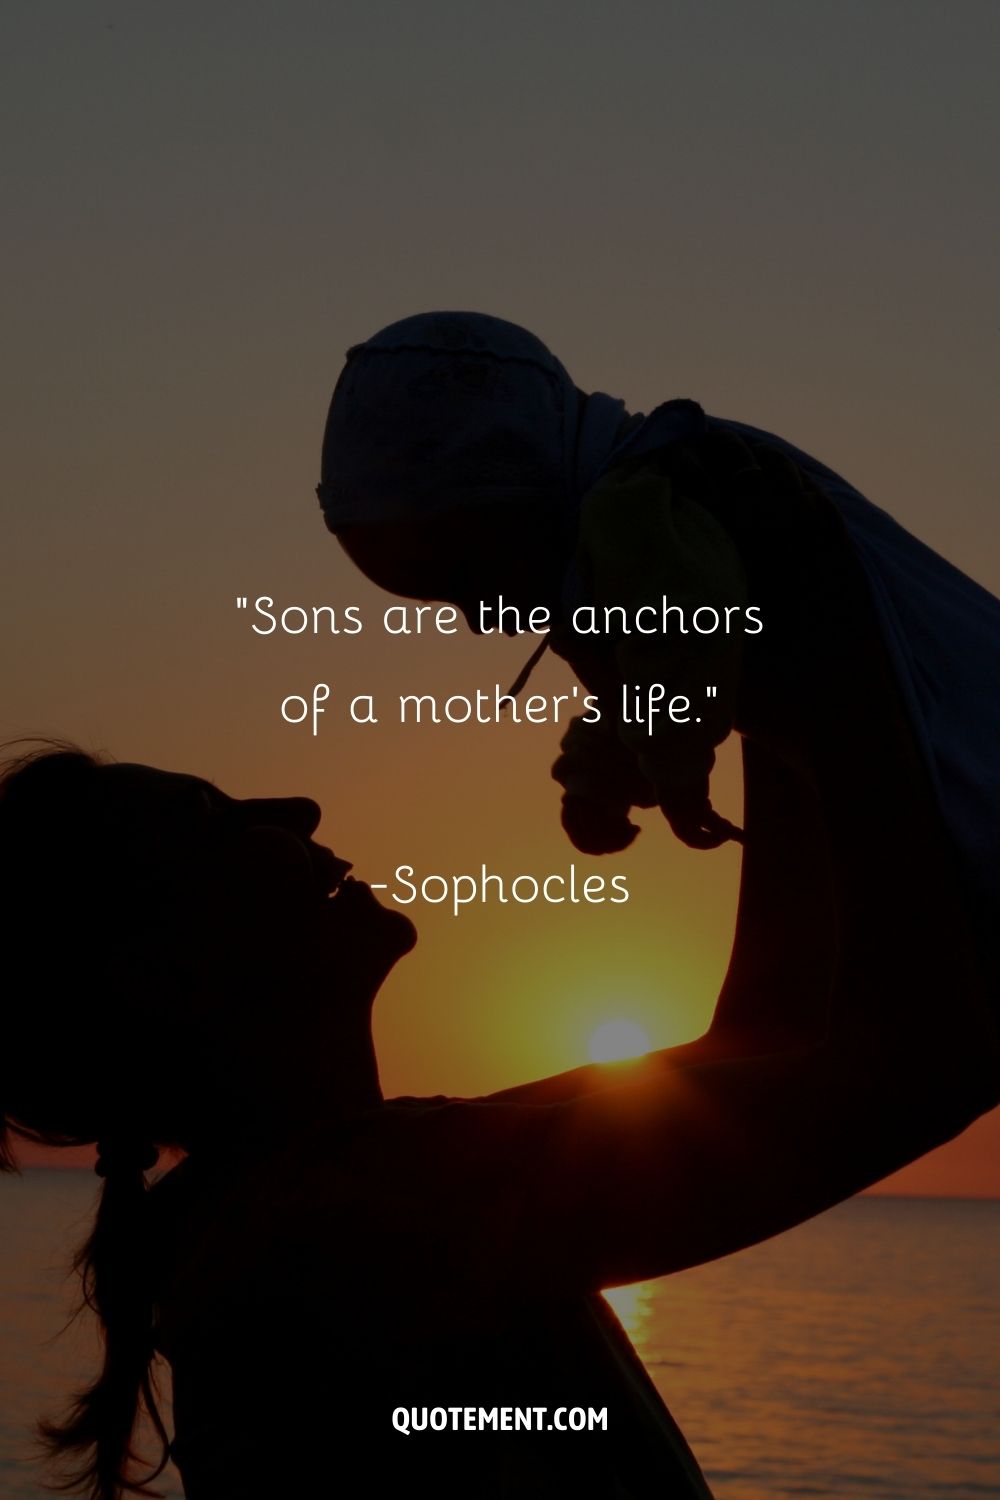 A silhouette of a woman lifting a young child into the air against a sunset over the ocean